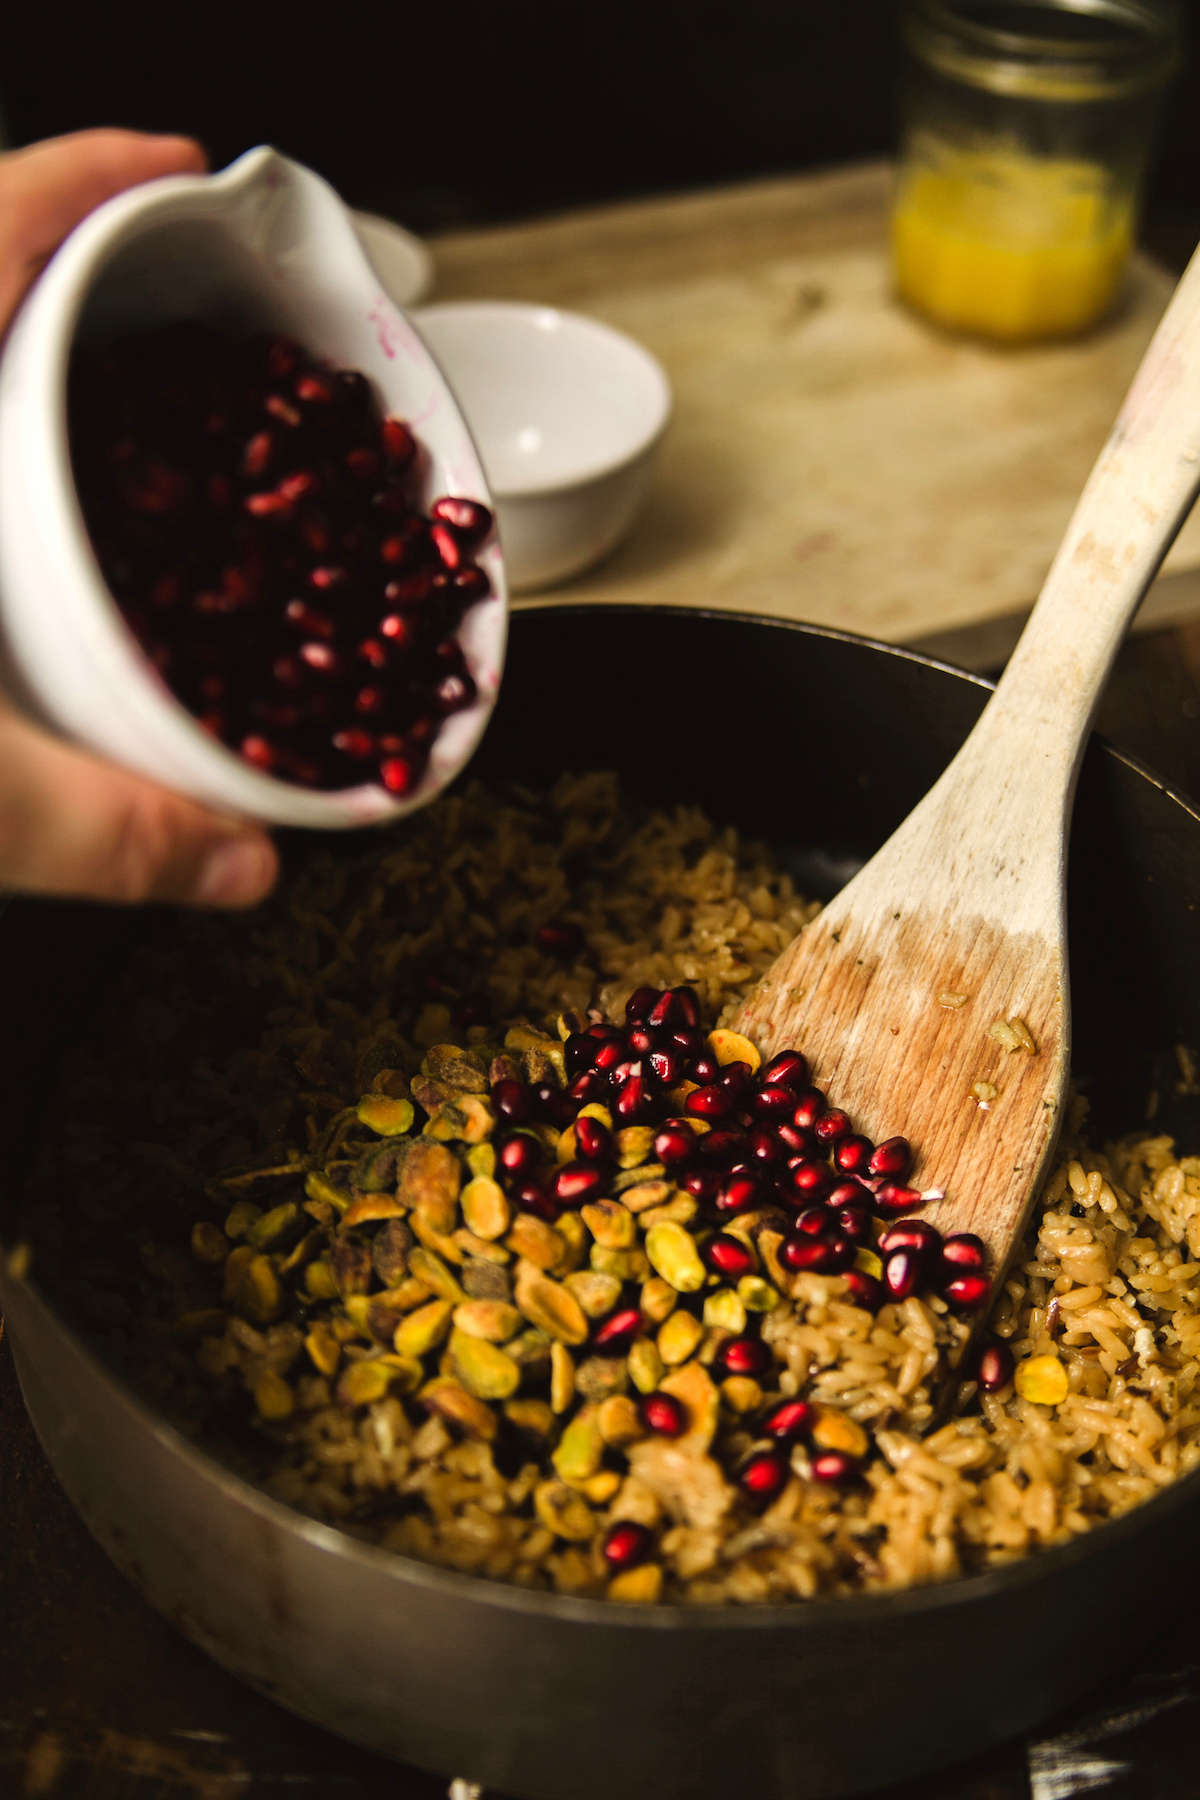 Pomegranate seeds being poured into the rice